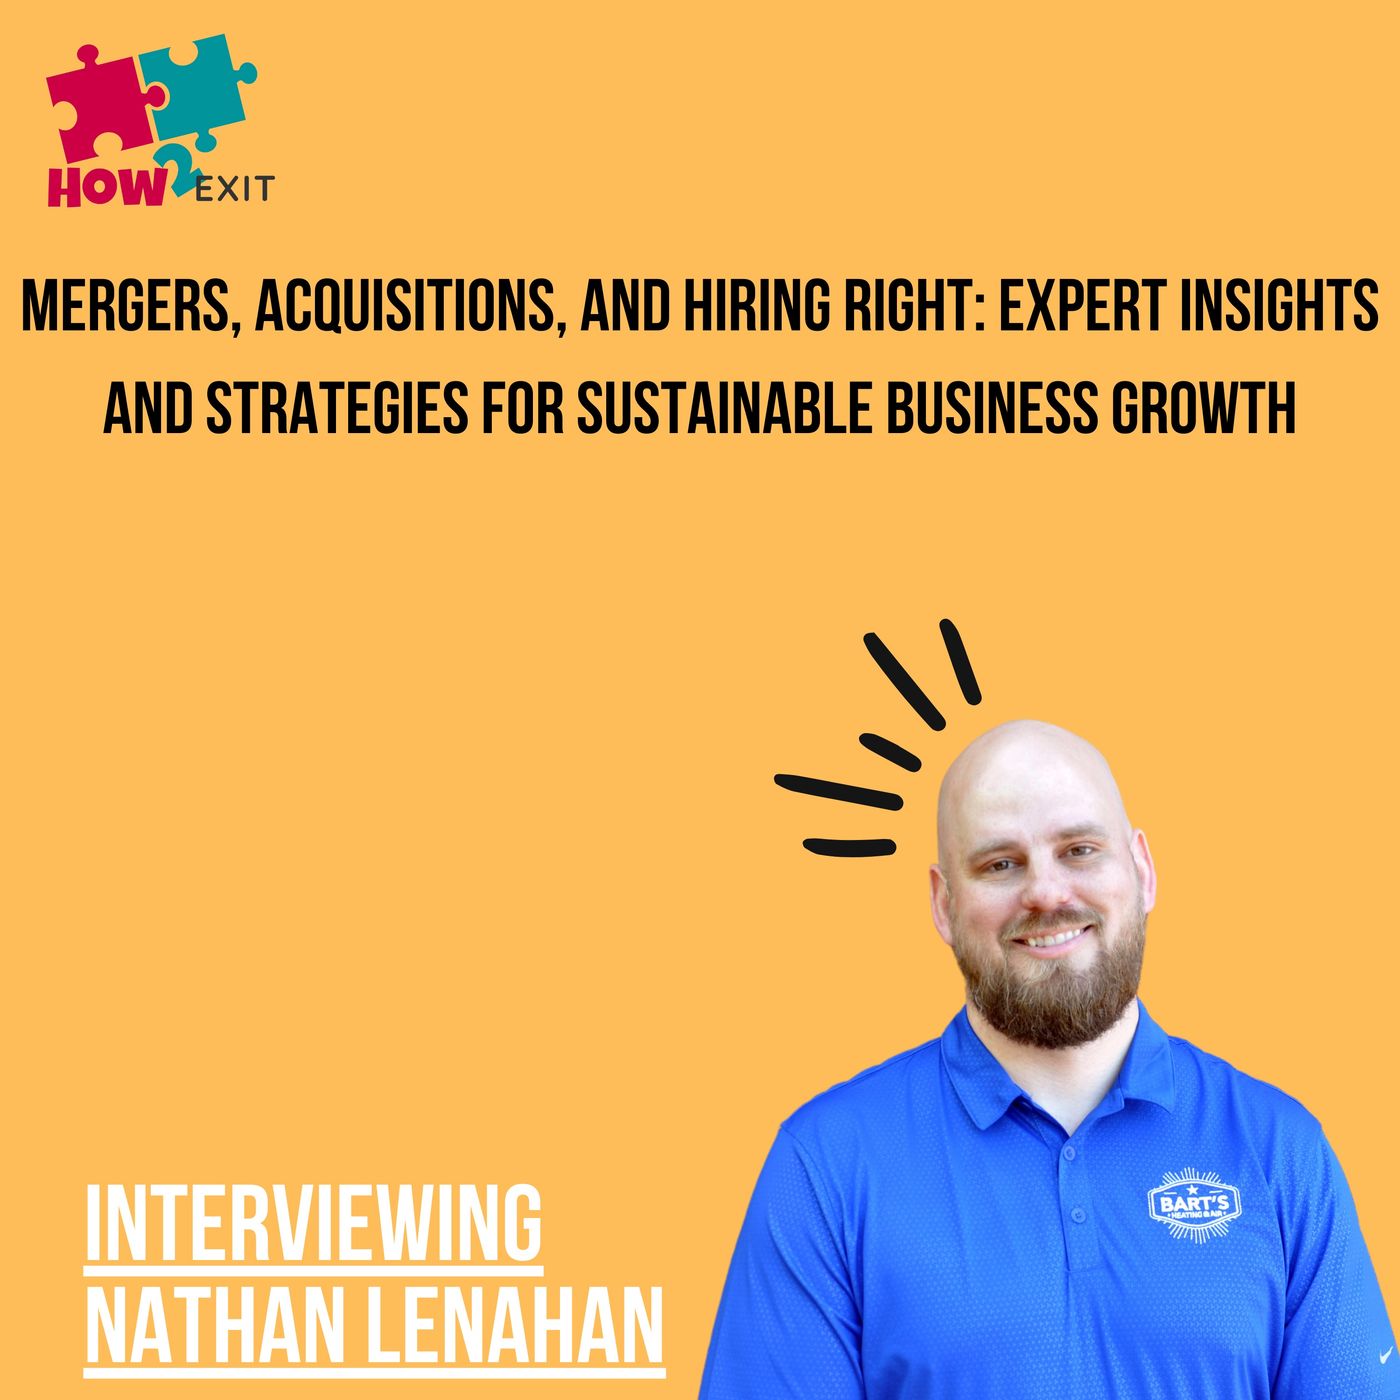 E218: Nathan Lenahan Discusses Hiring Operators for Small Businesses